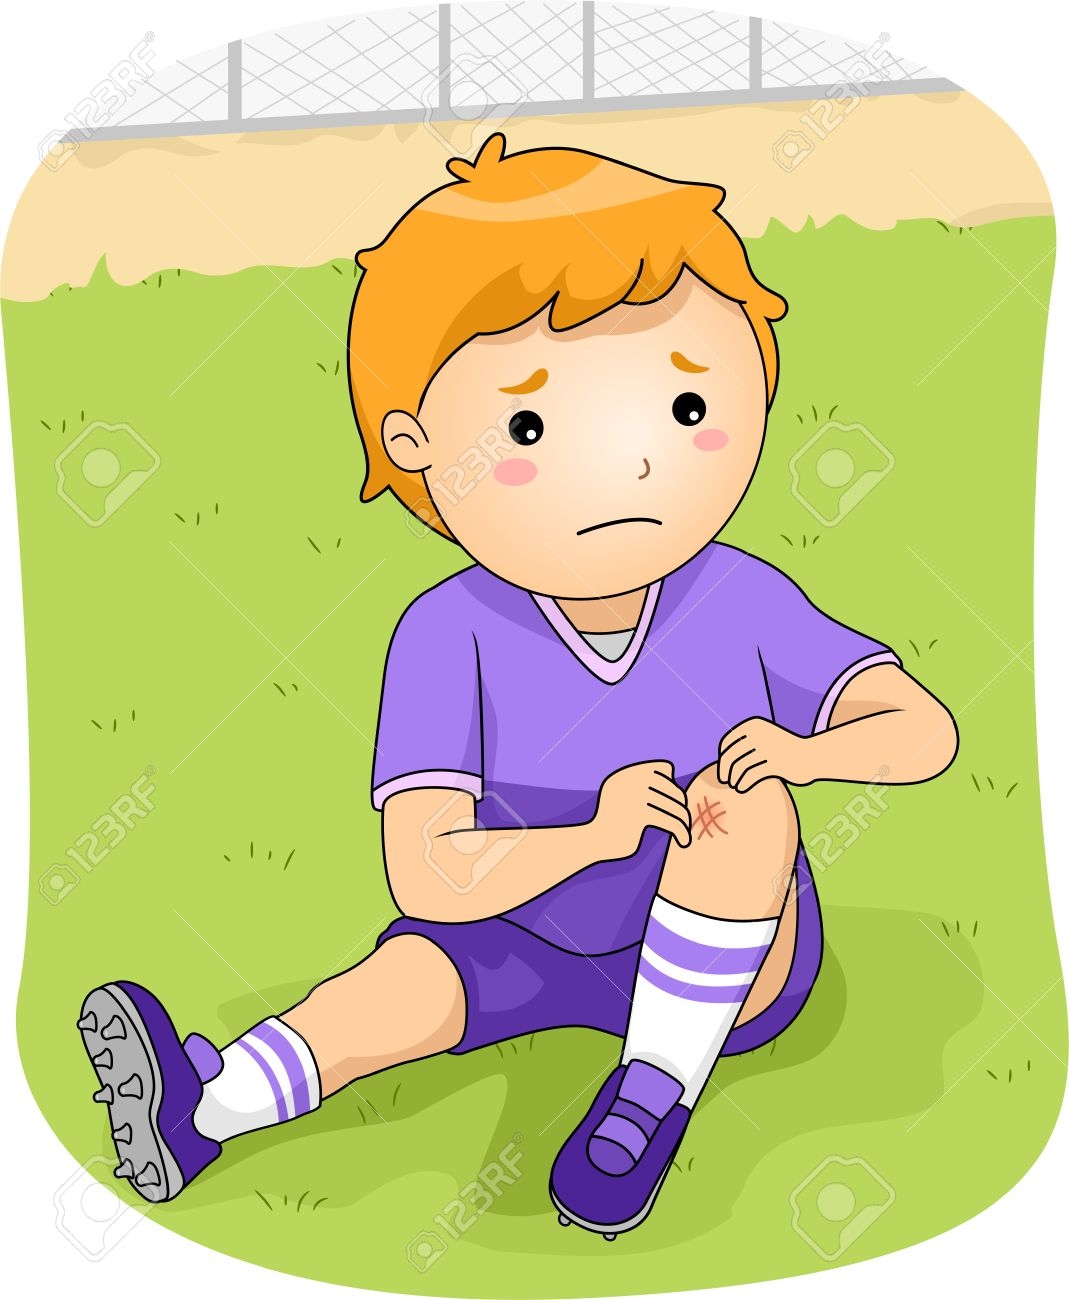 Hurt clipart Fresh Legs clipart hurt Pencil and in color legs.